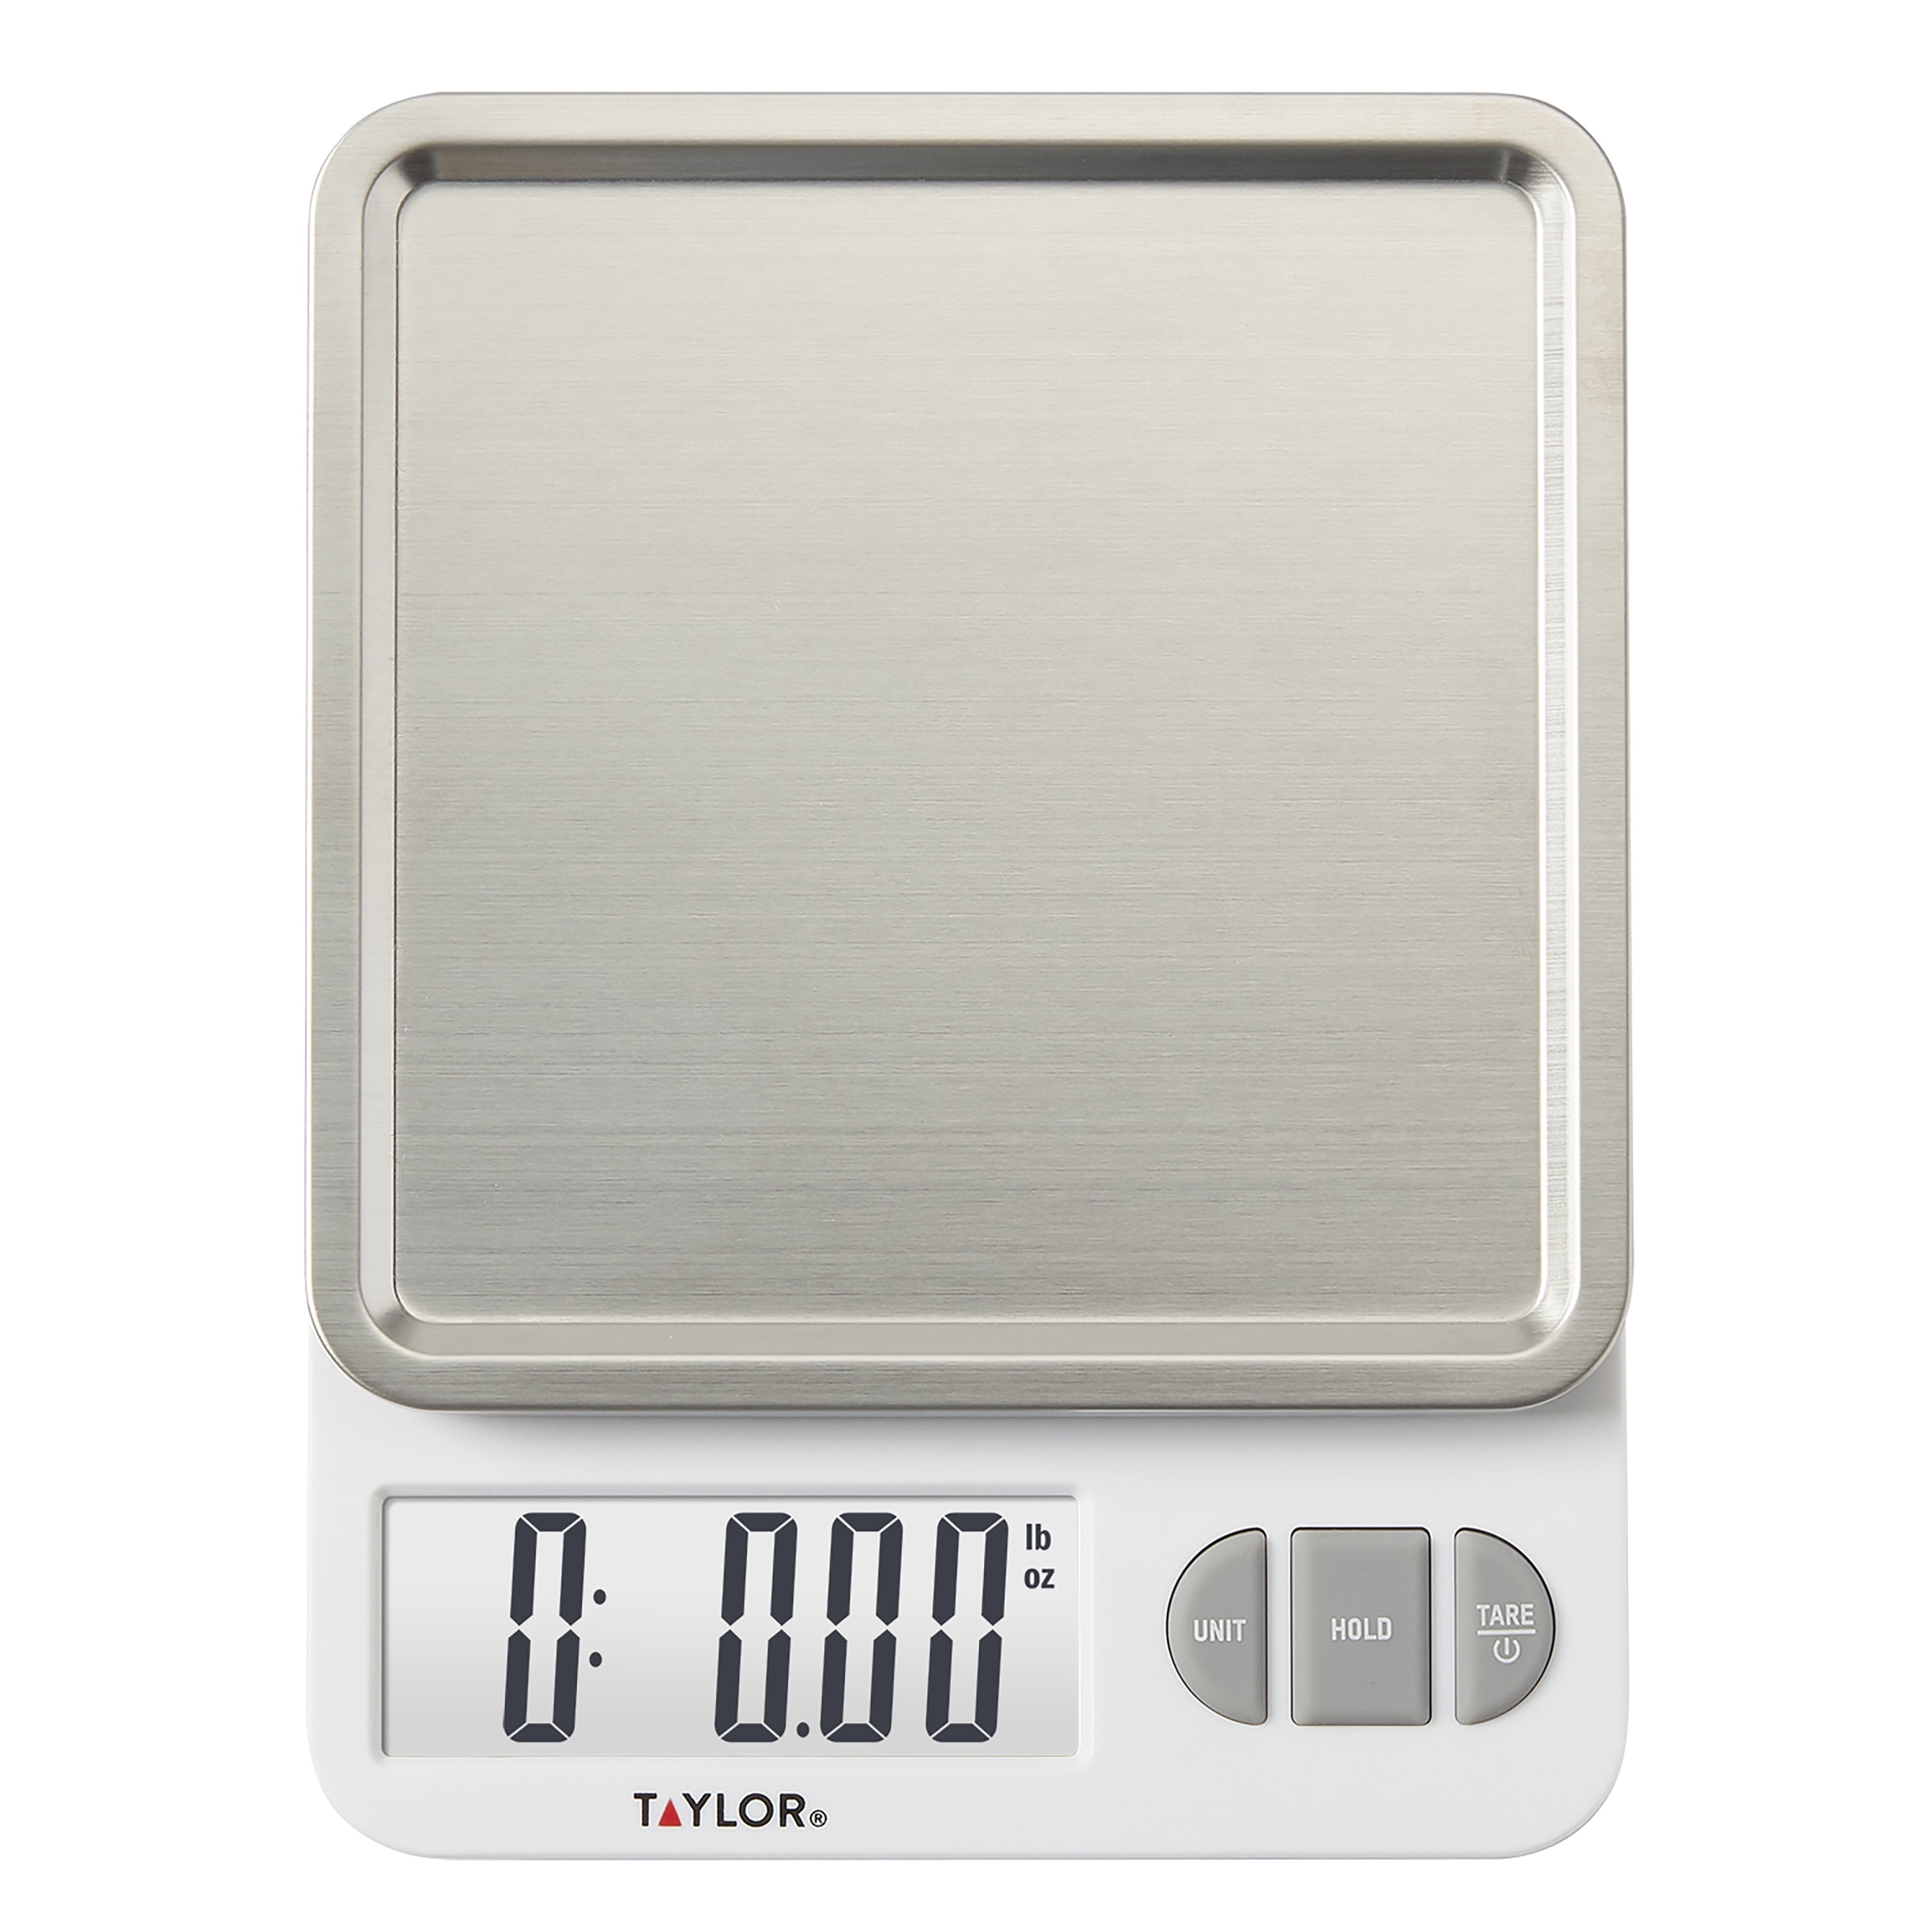 11LB/1G Digital Kitchen Weight Scale Digital LCD Electronic Diet Food Scale New 